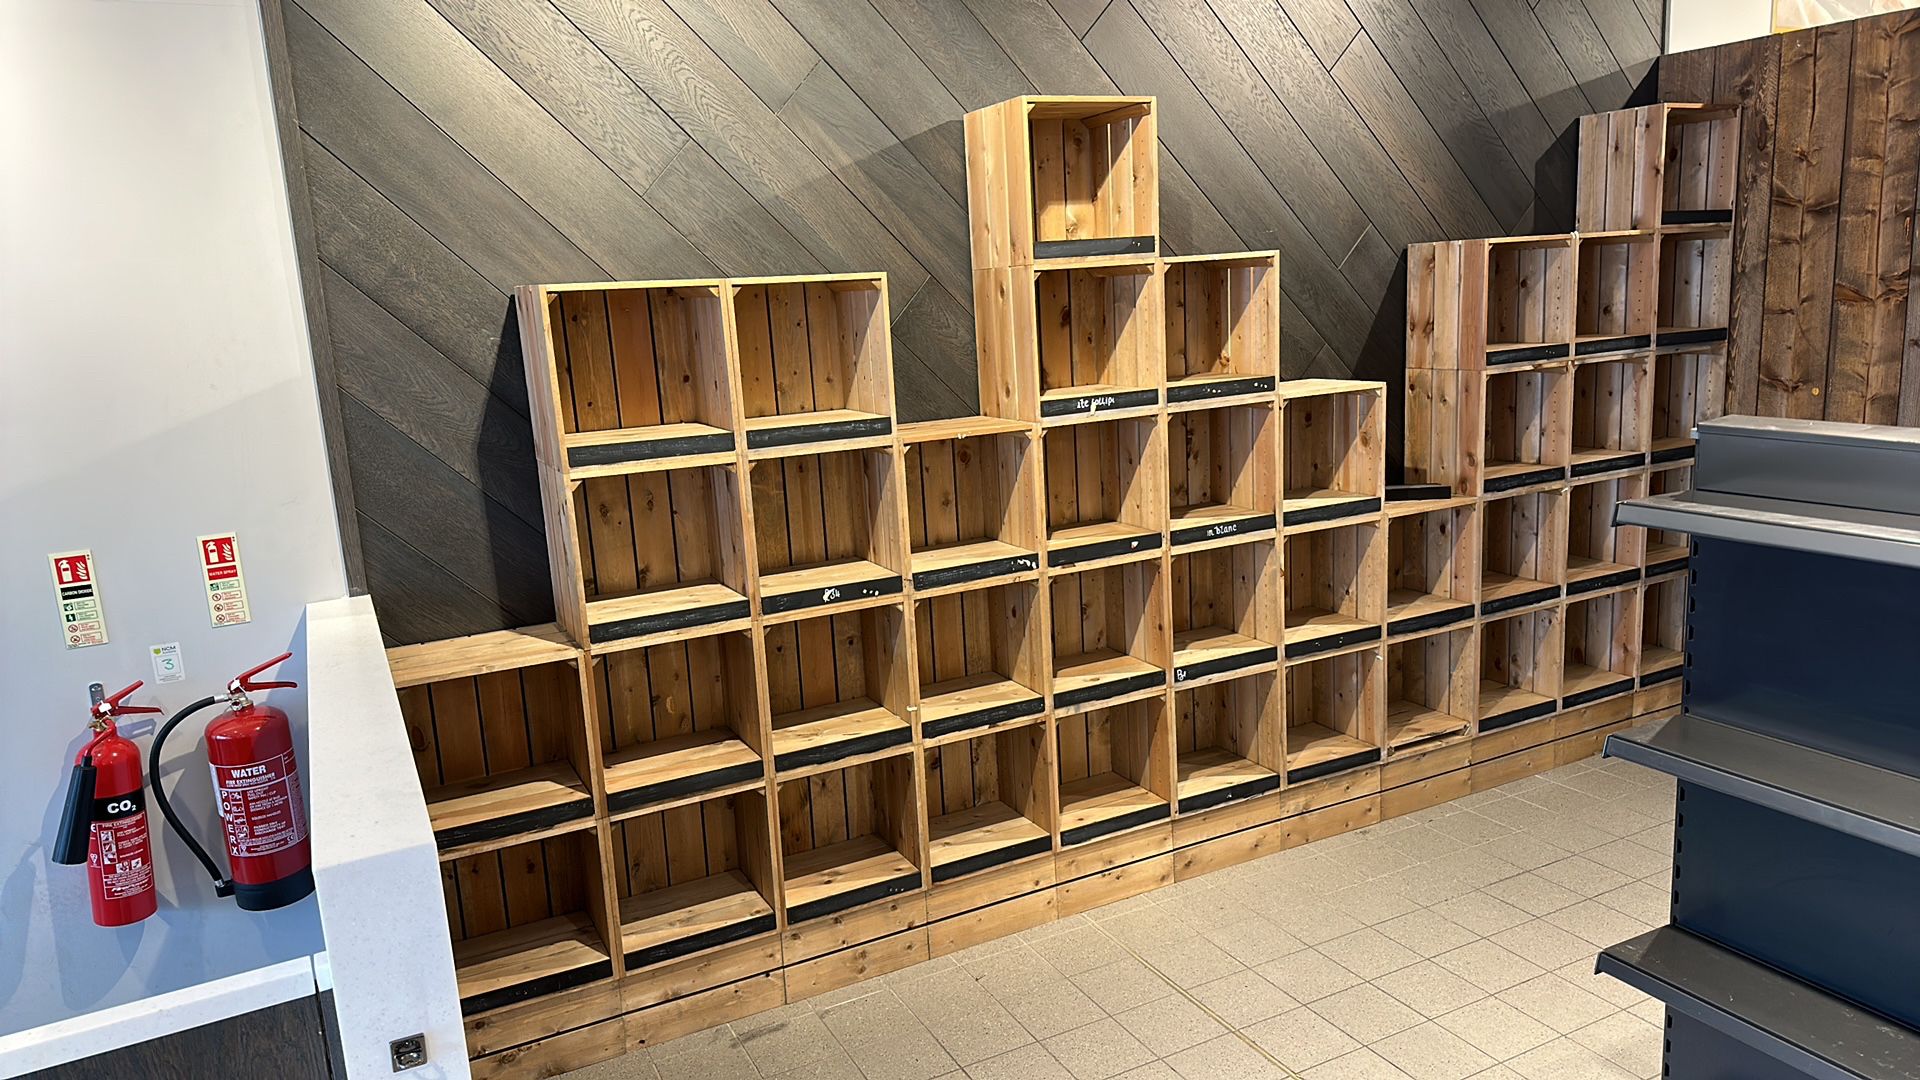 Wooden crate / pigeon hole display or storage - Image 2 of 5